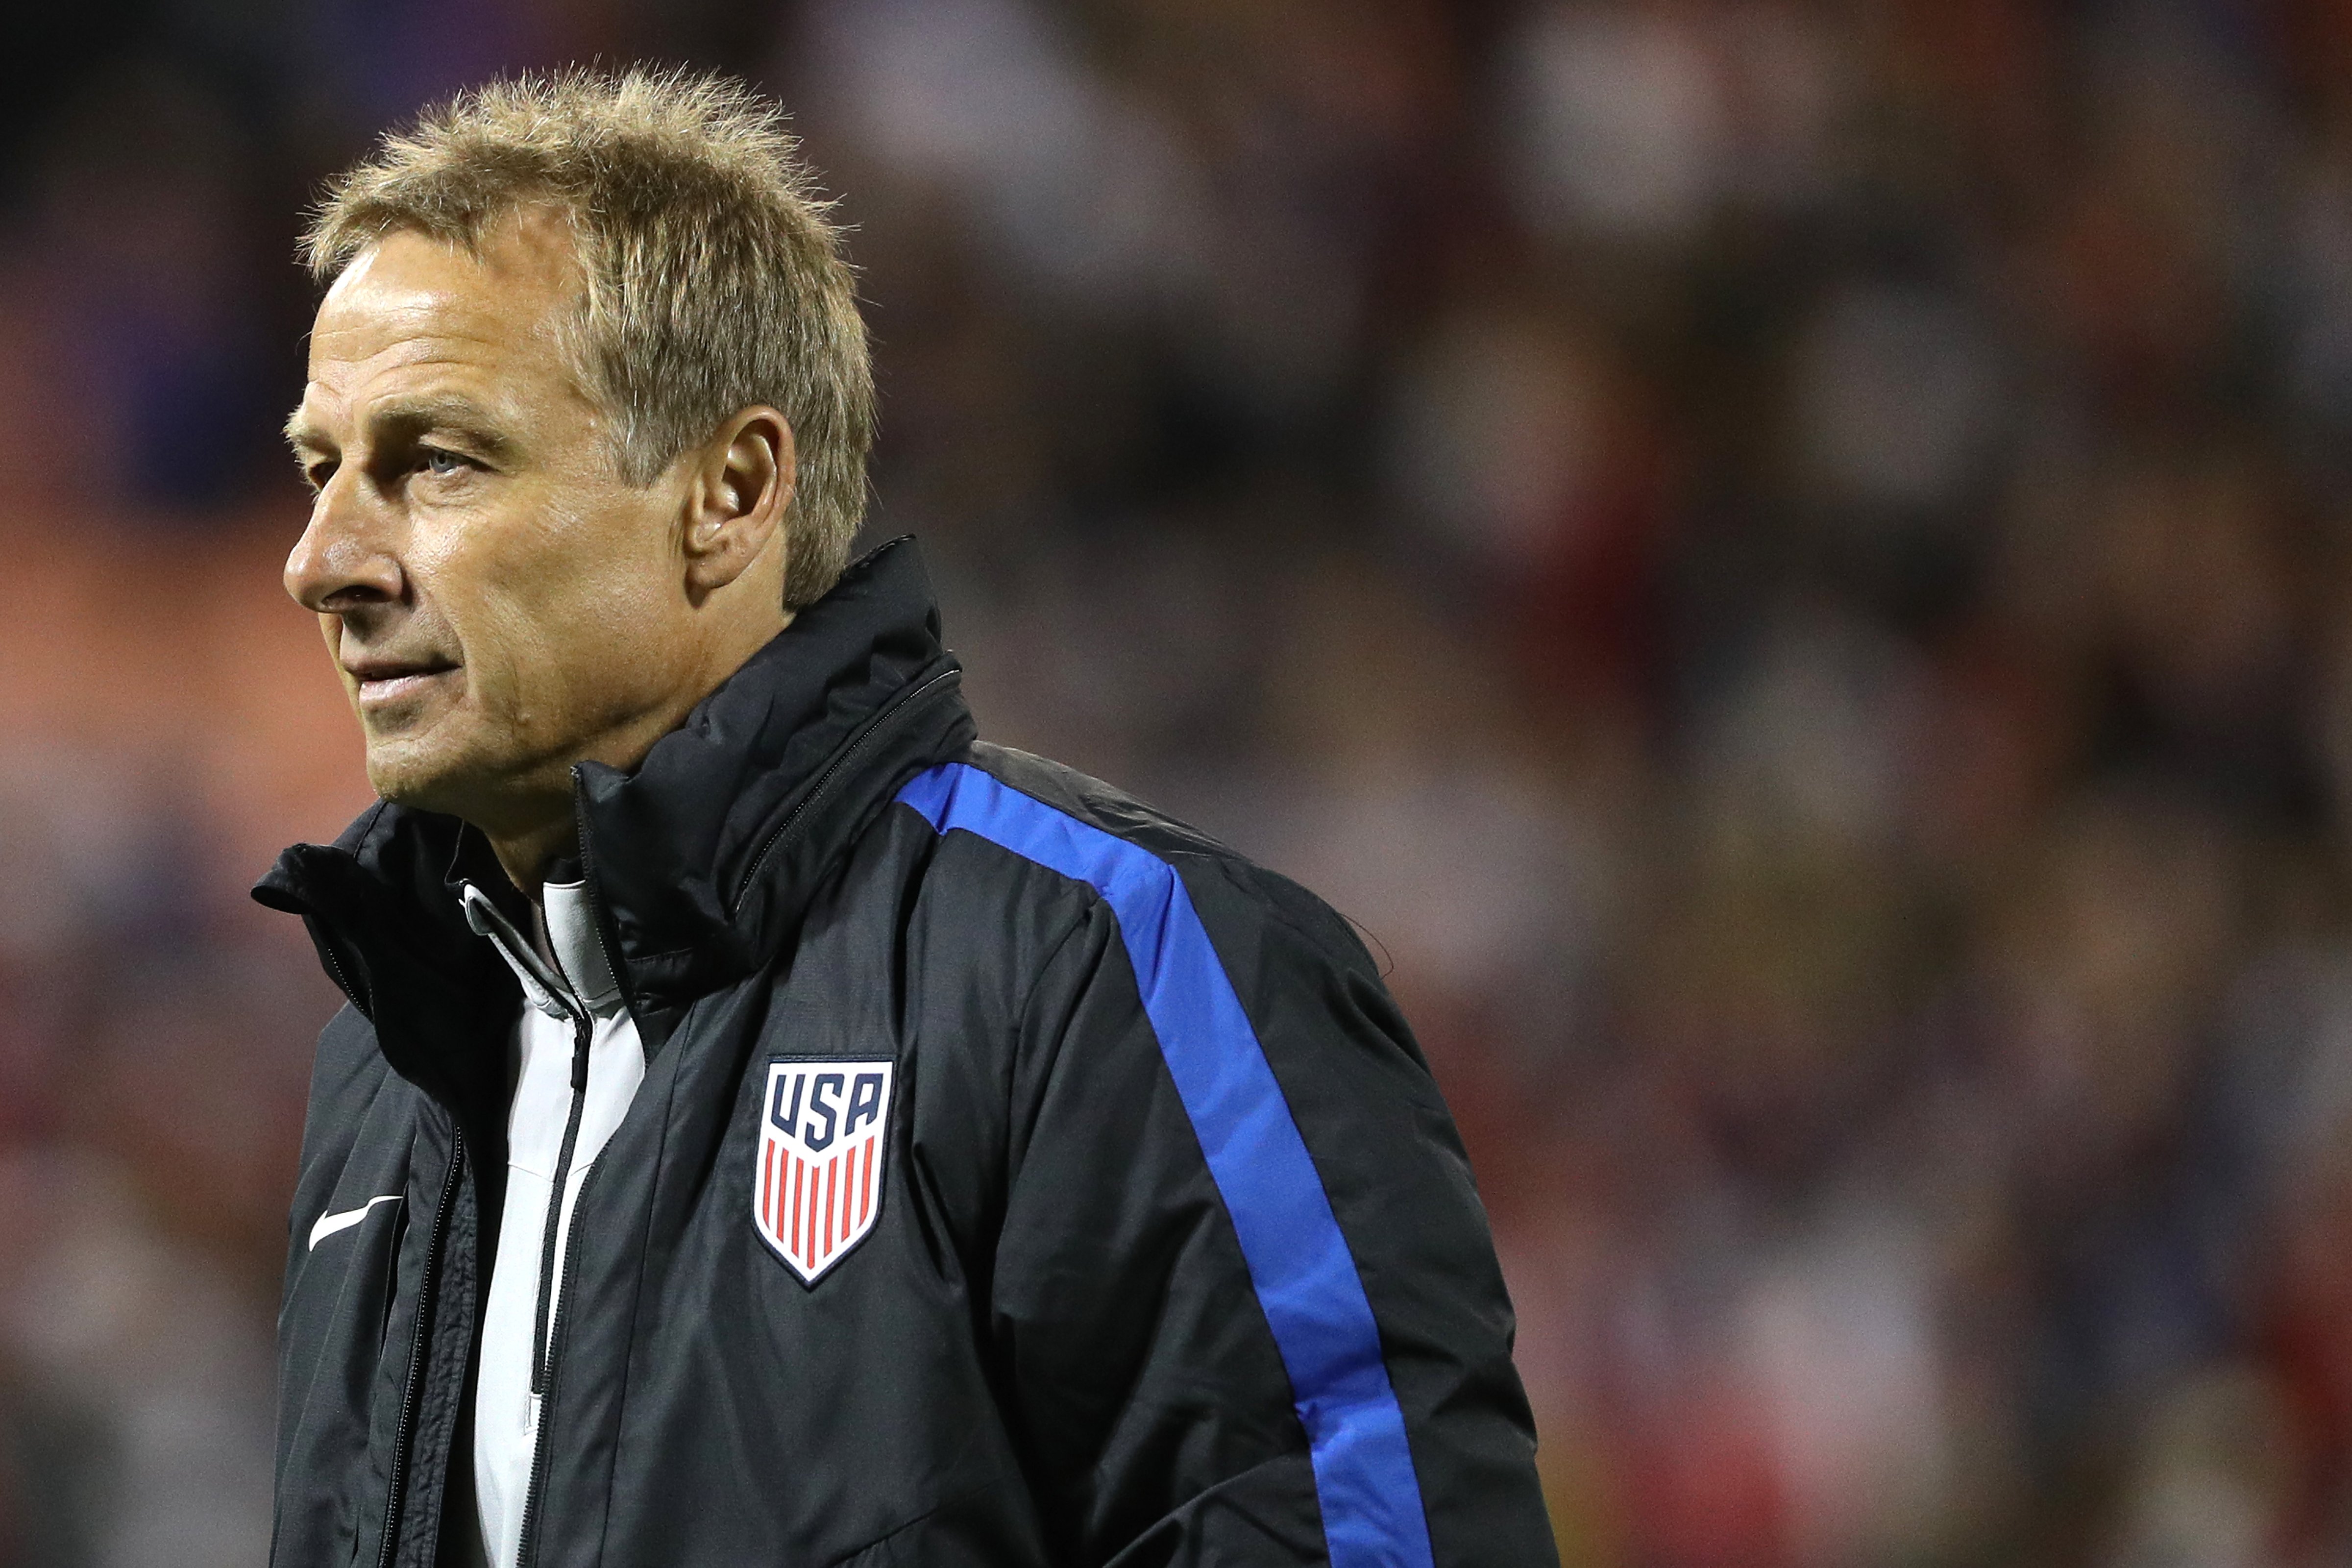 Ex-U.S. soccer head coach Jurgen Klinsmann looks on after playing against New Zealand during an International Friendly at RFK Stadium on October 11, 2016 in Washington, DC. (Patrick Smith&mdash;Getty Images)